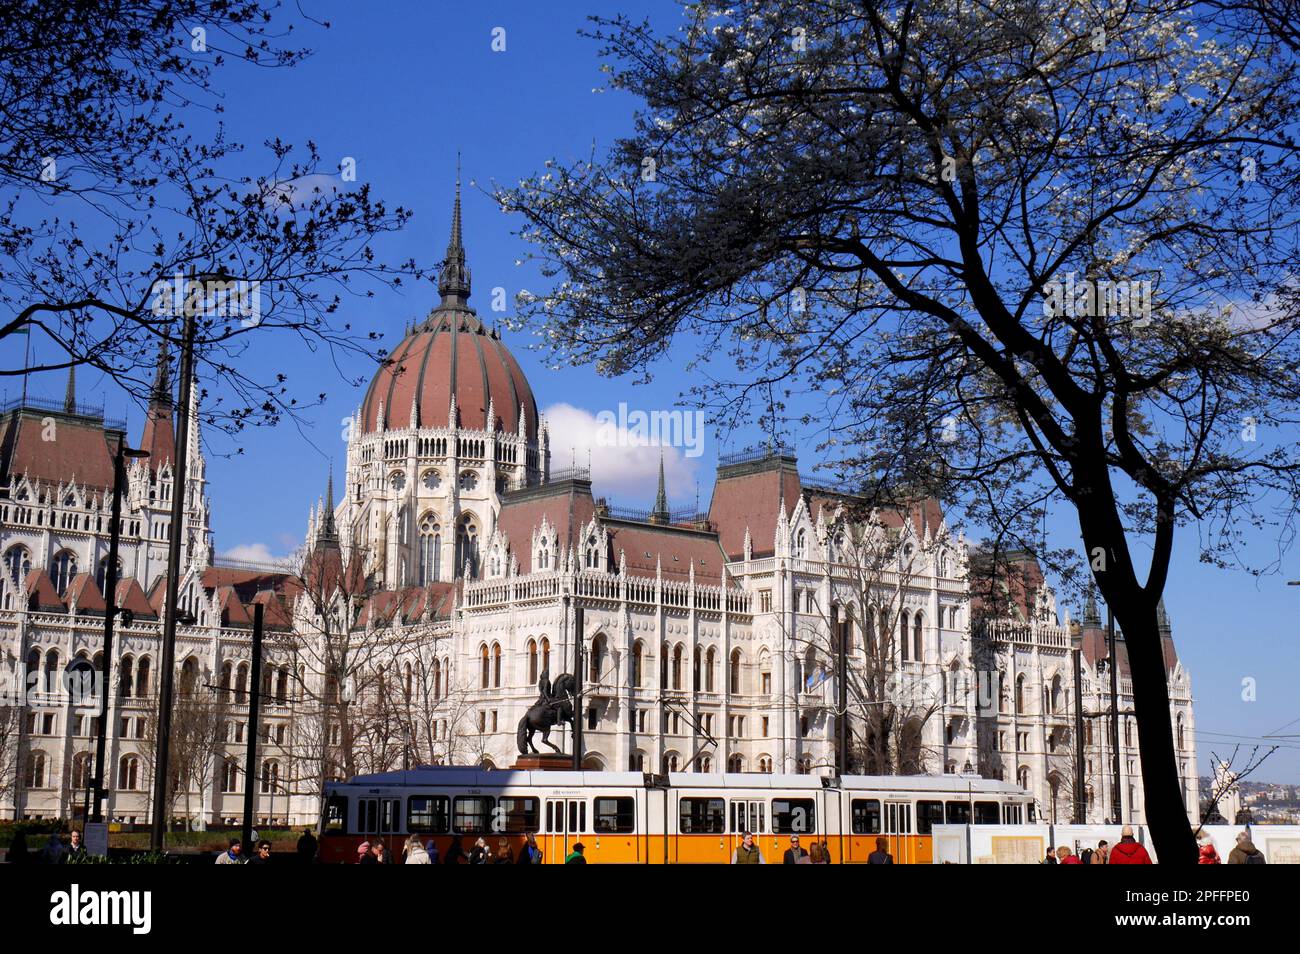 The neo-gothic Parliament building in Kossuth ter, Kossuth Square, designed by Imre Steindl in 1885, Budapest, Hungary Stock Photo